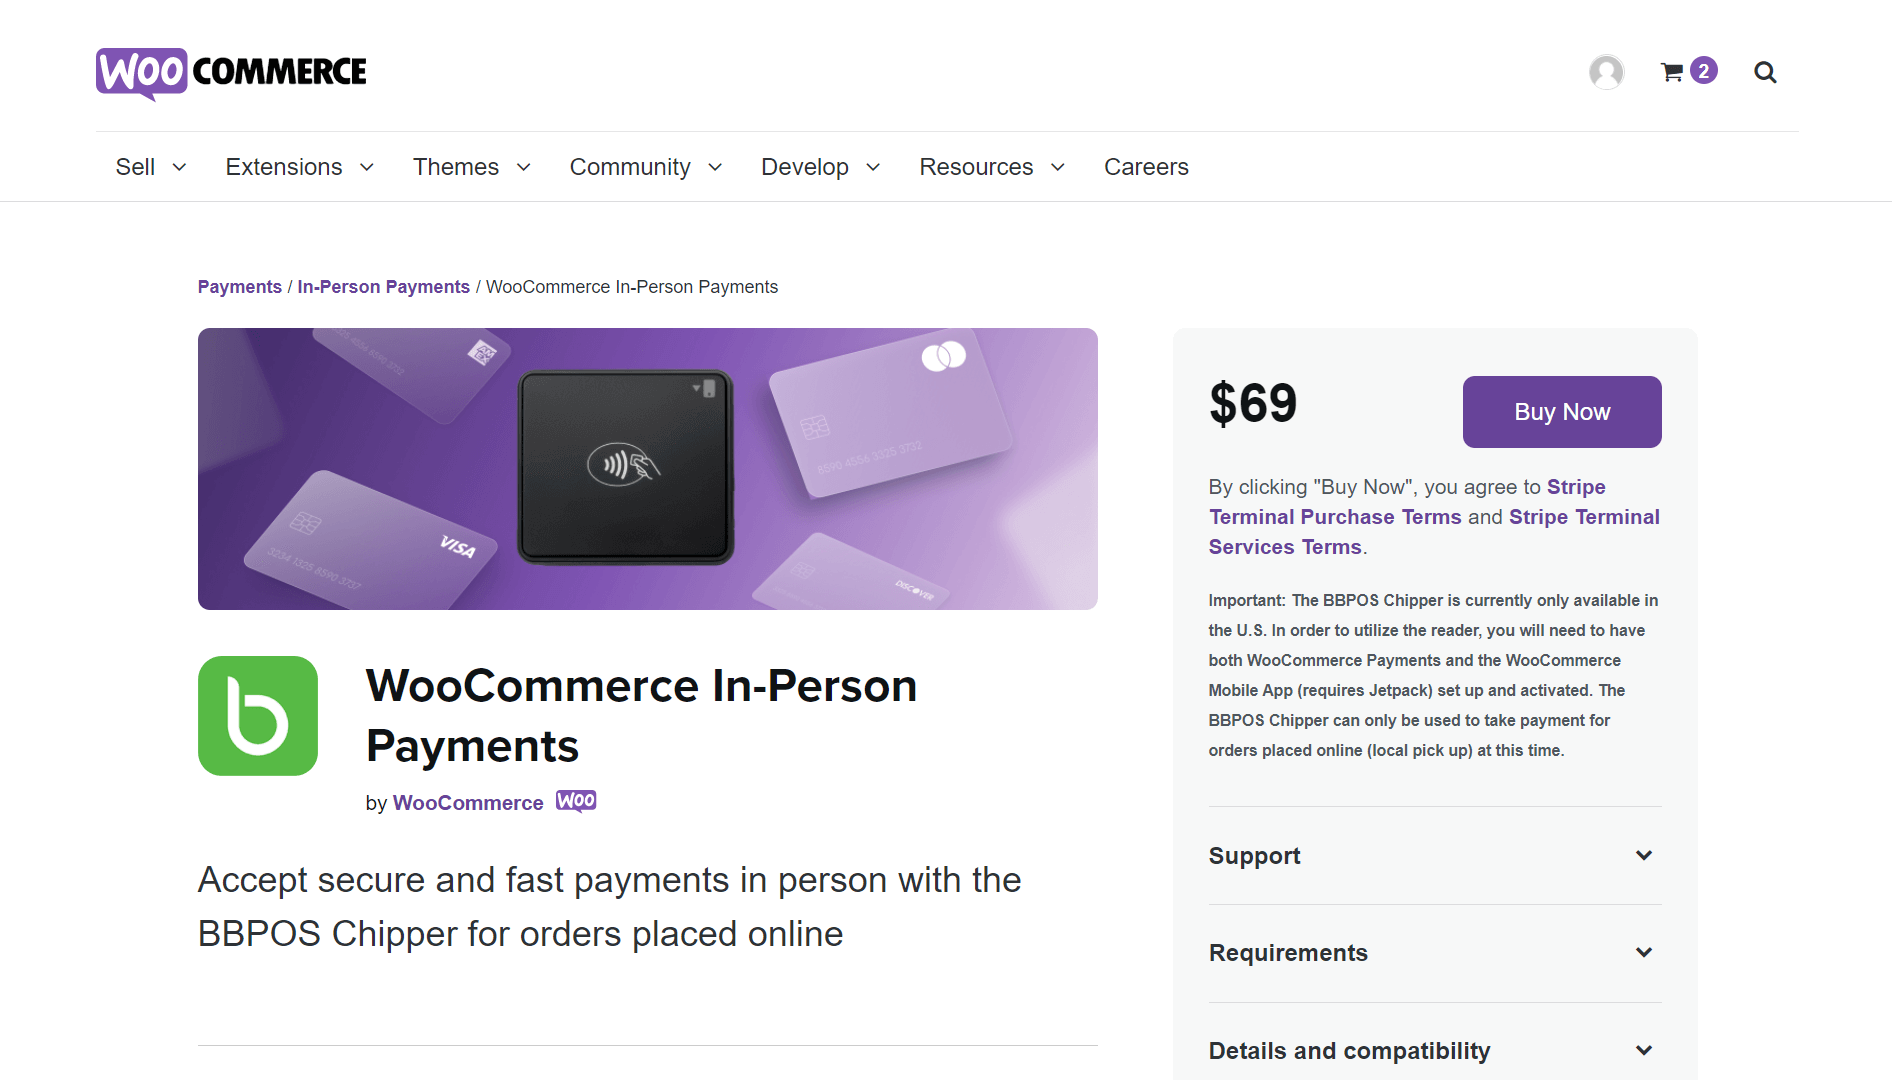 woocommerce in-person payment